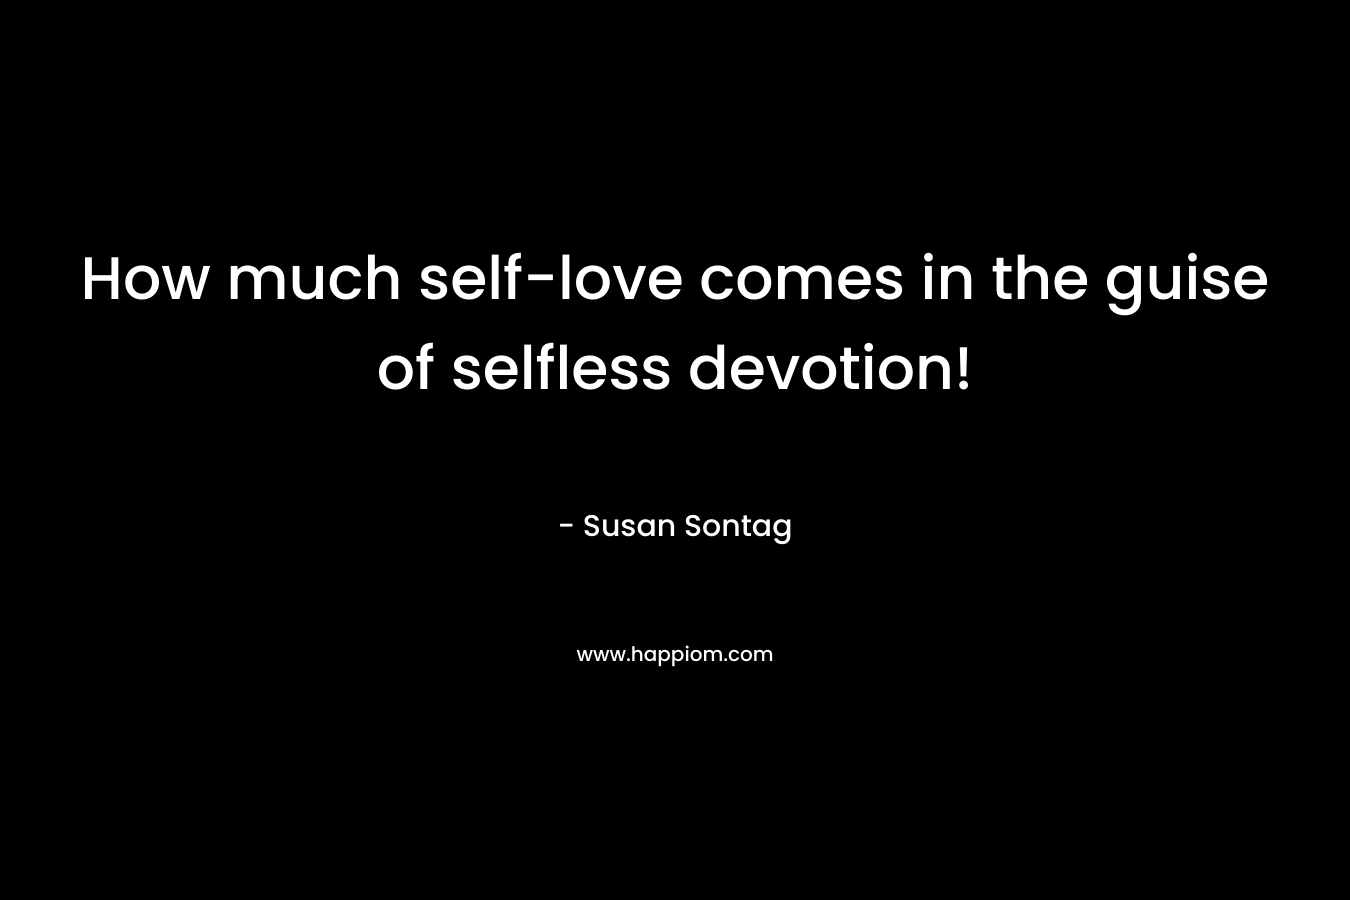 How much self-love comes in the guise of selfless devotion! – Susan Sontag